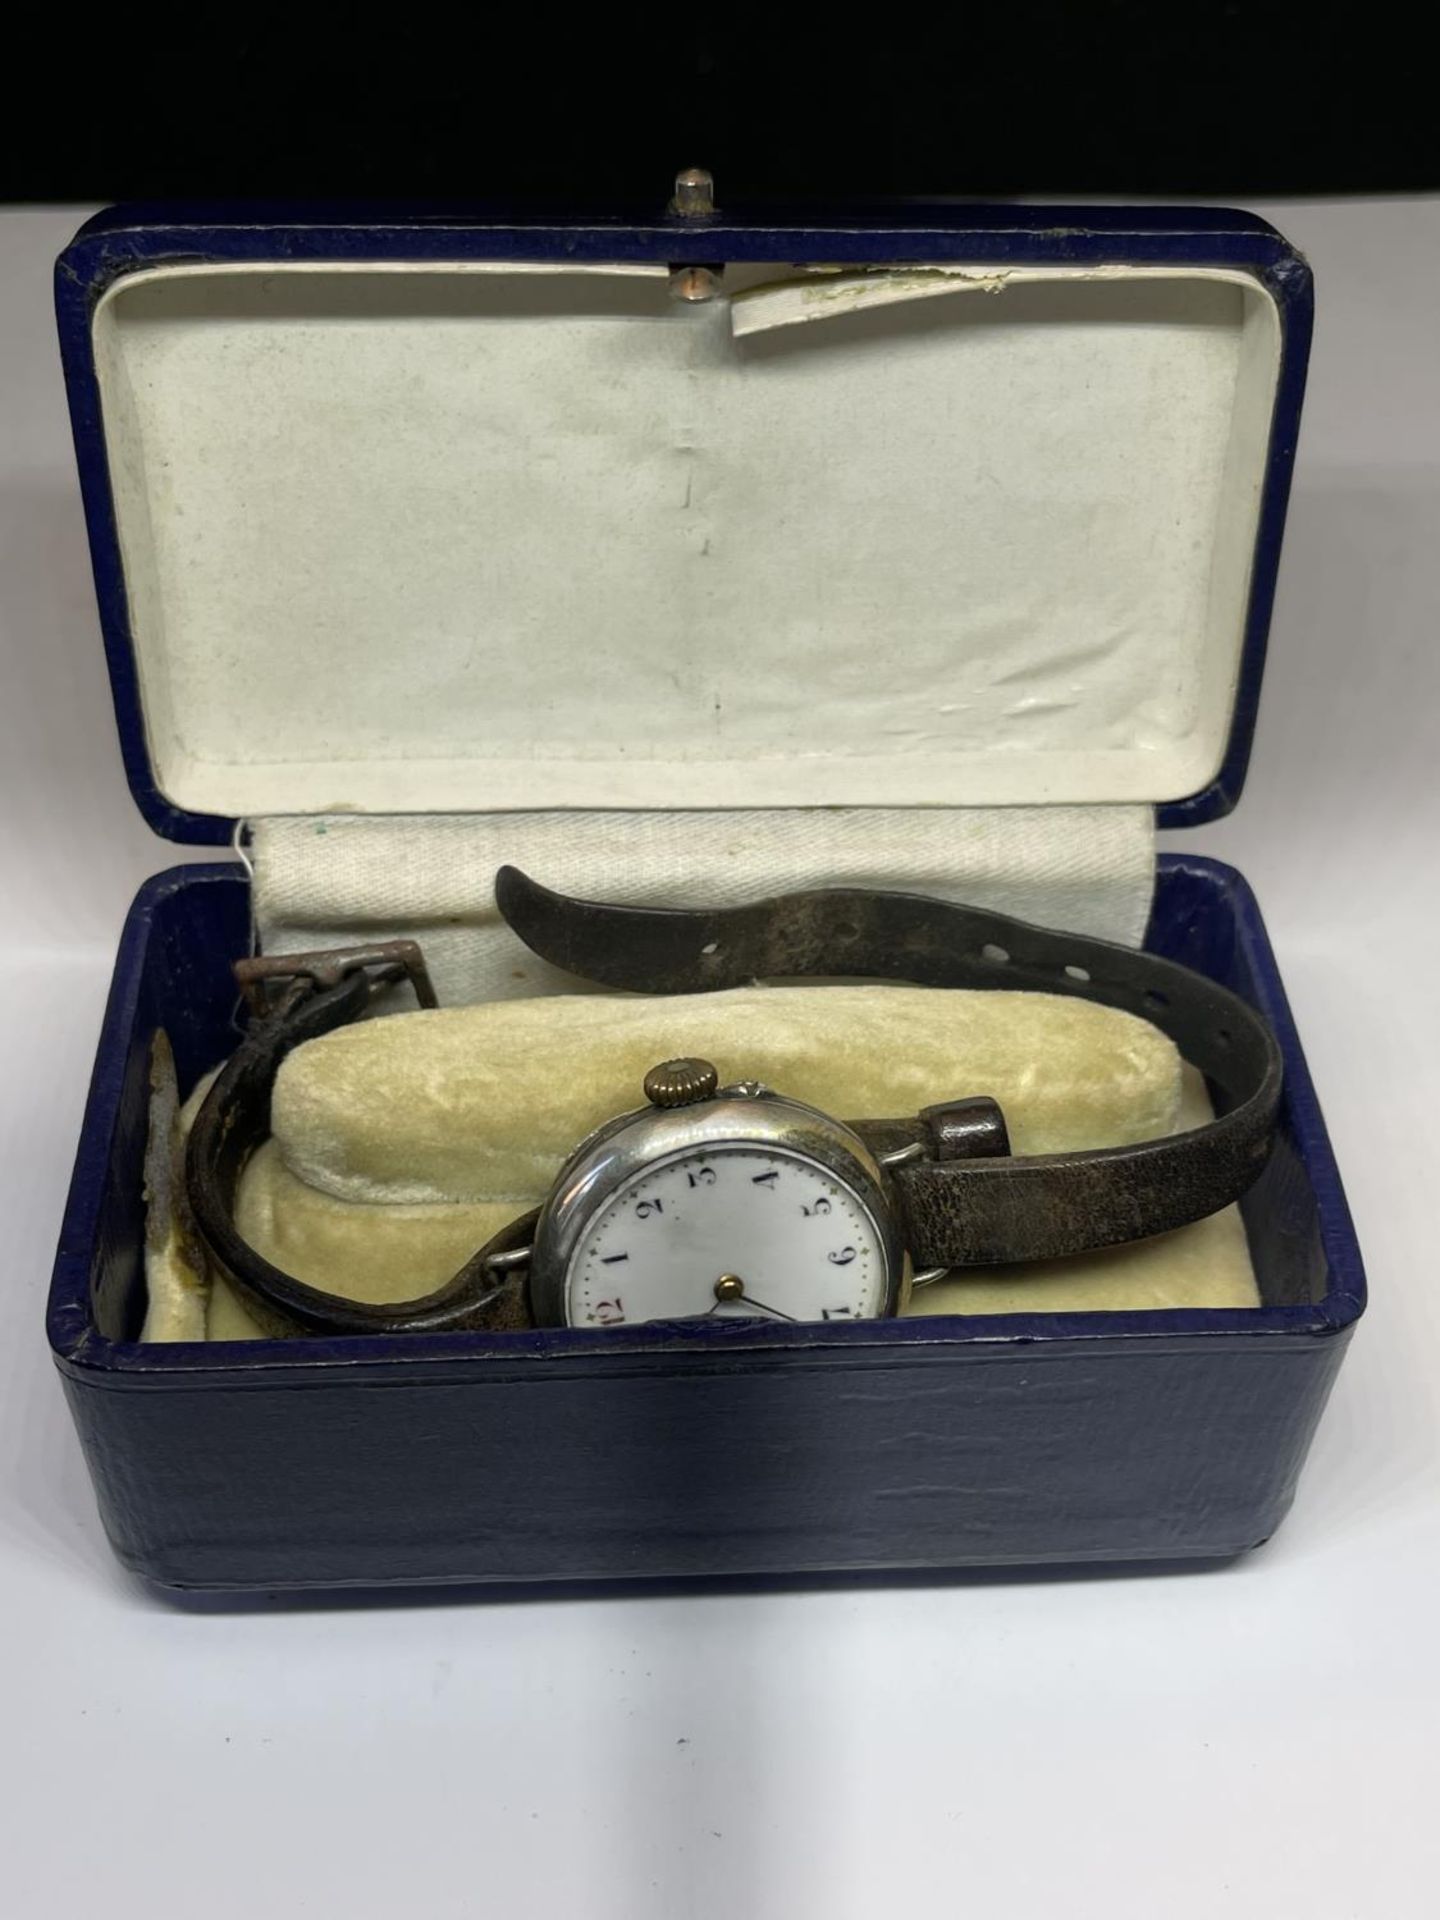 A MARKED 925 VINTAGE WRIST WATCH WITH A LEATHER STRAP IN A PRESENTATION BOX - Image 5 of 5